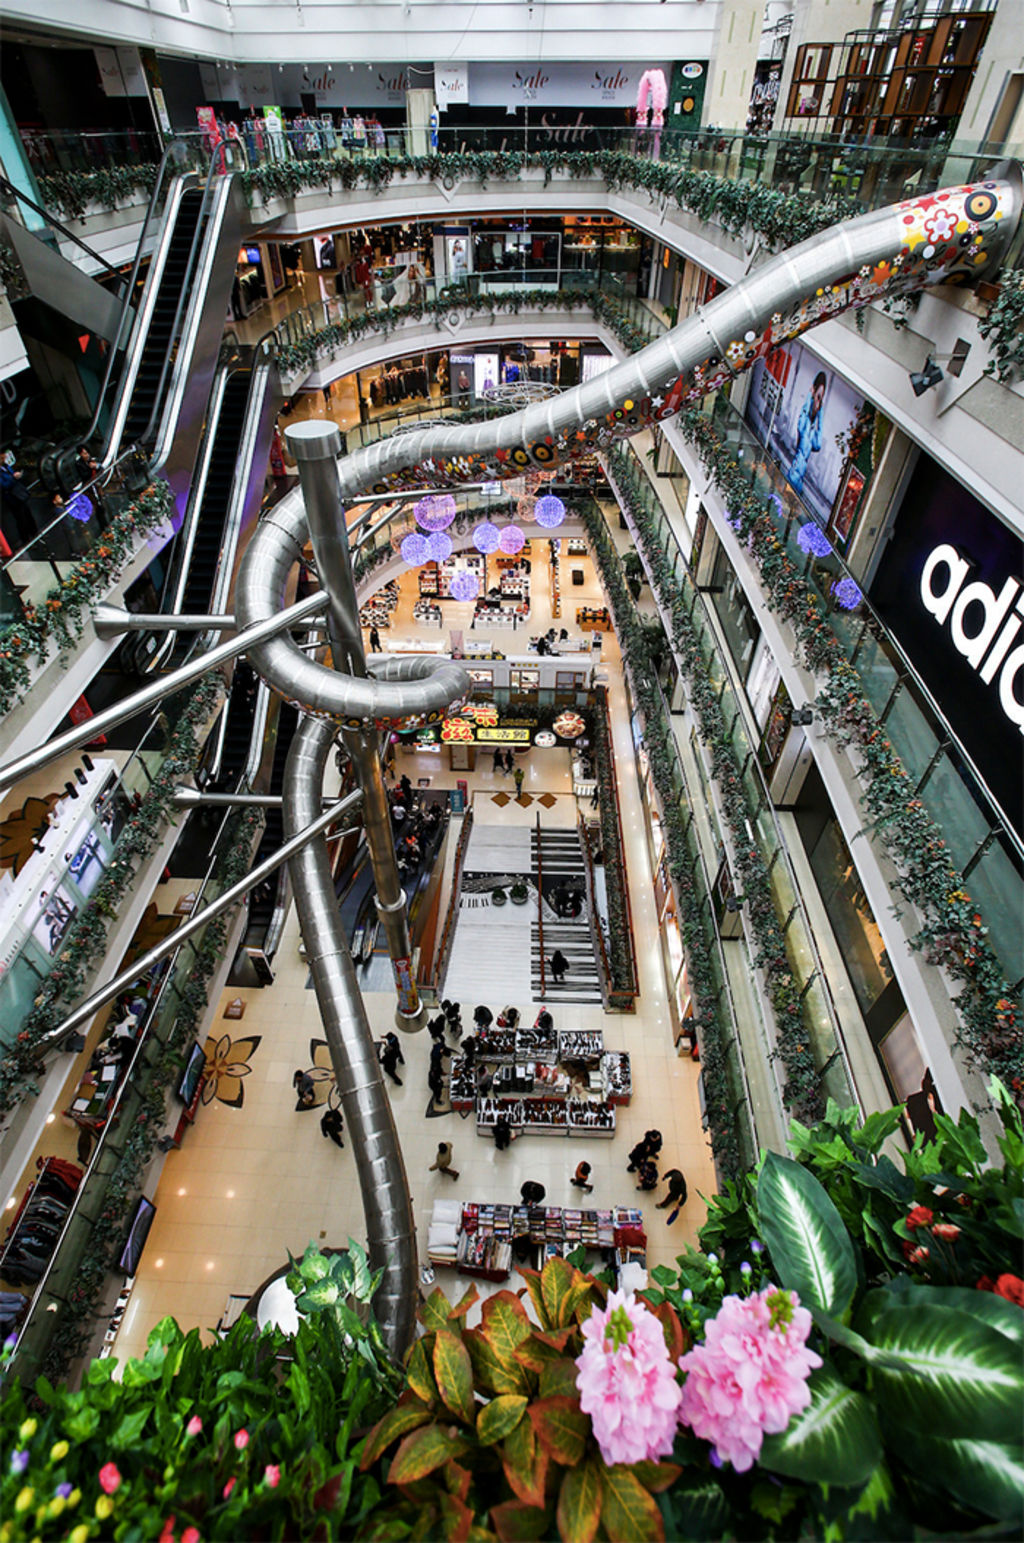 Giant slide to open in Chinese shopping mall